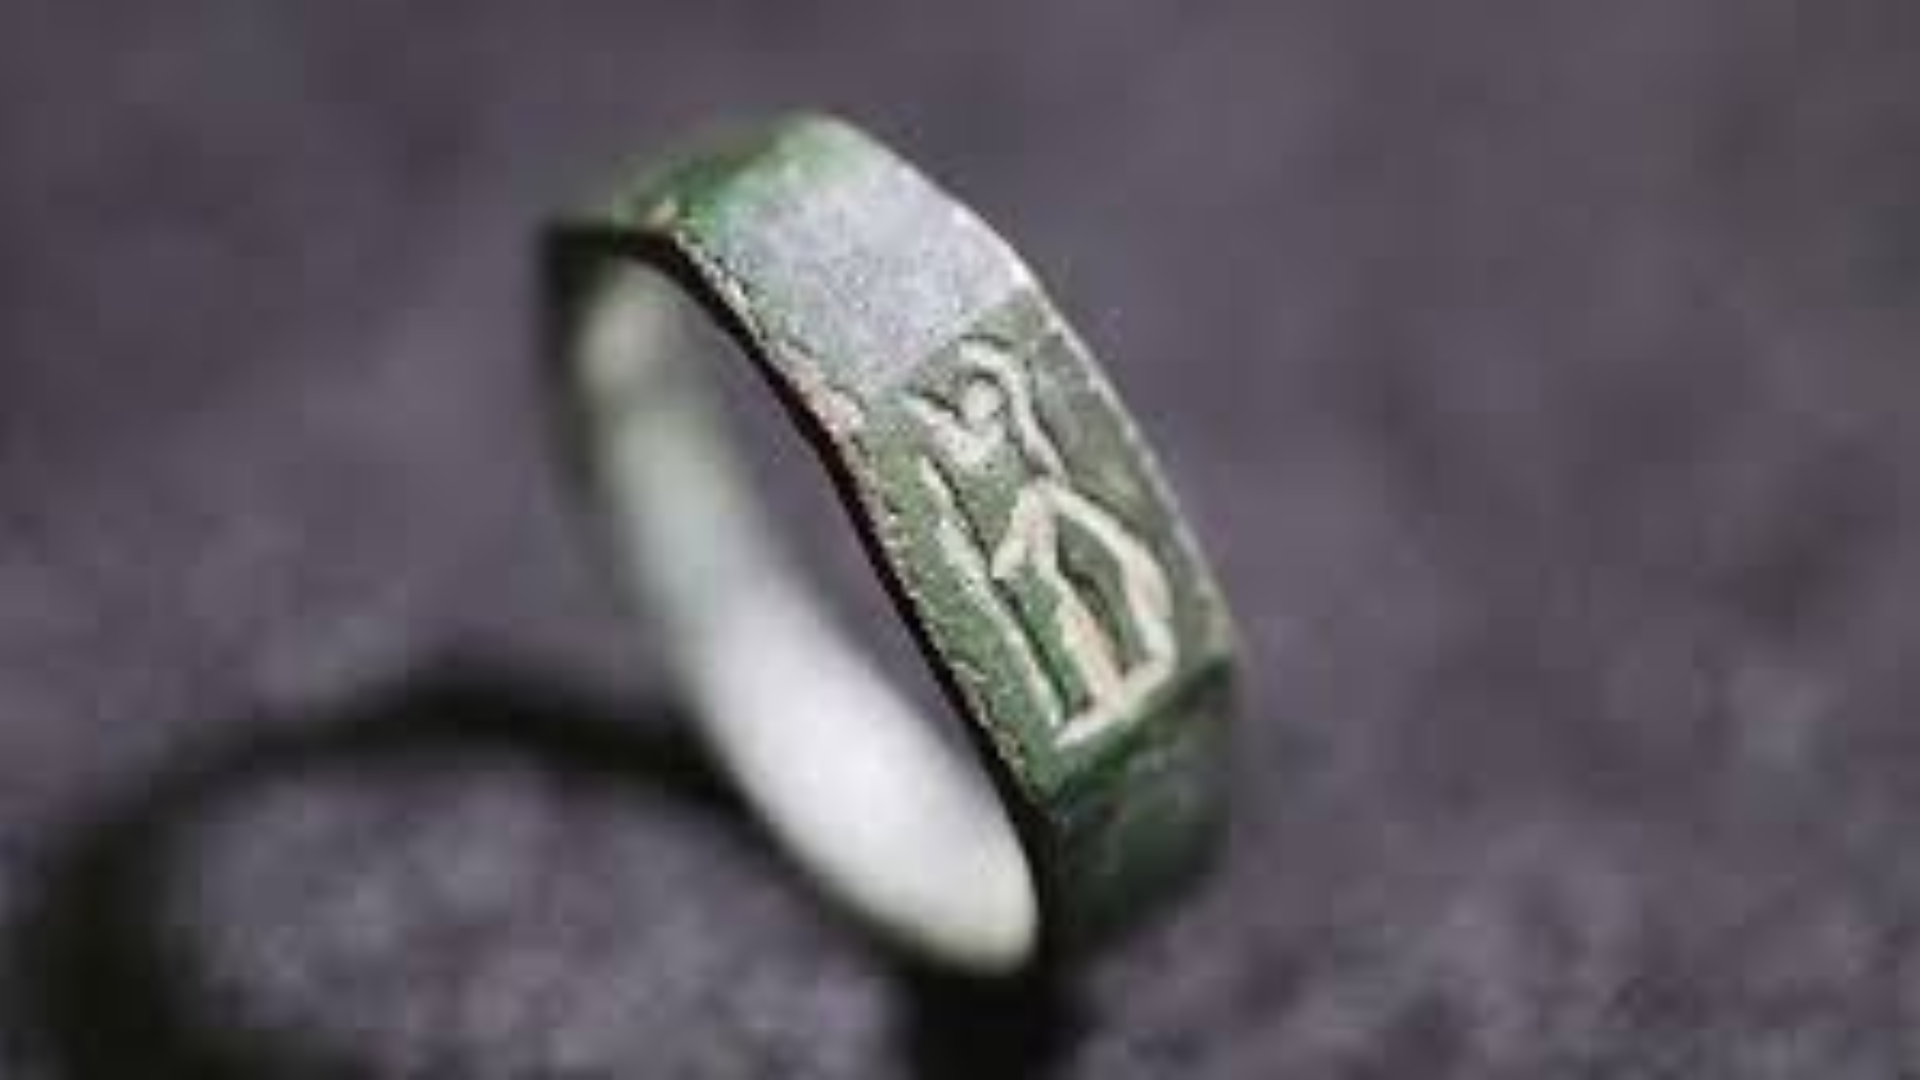 13-Year-Old Boy Discovers Roman-Era Ring; ‘Thought It Was A Rusty Bolt’